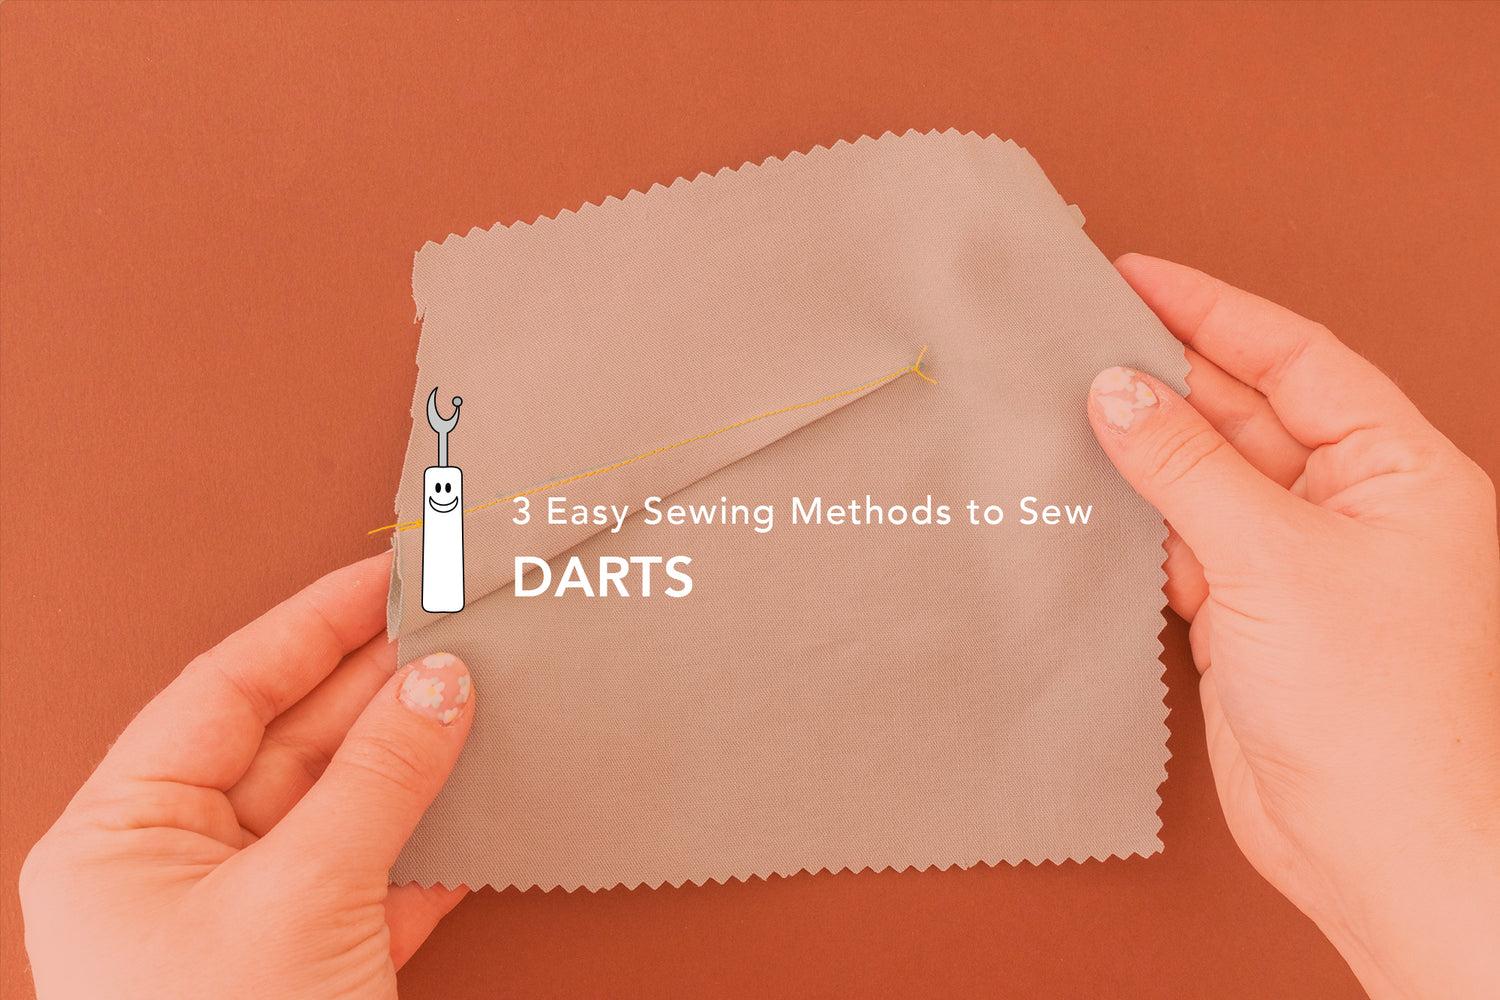 3 Easy Sewing Methods to sew Darts & sewing tips